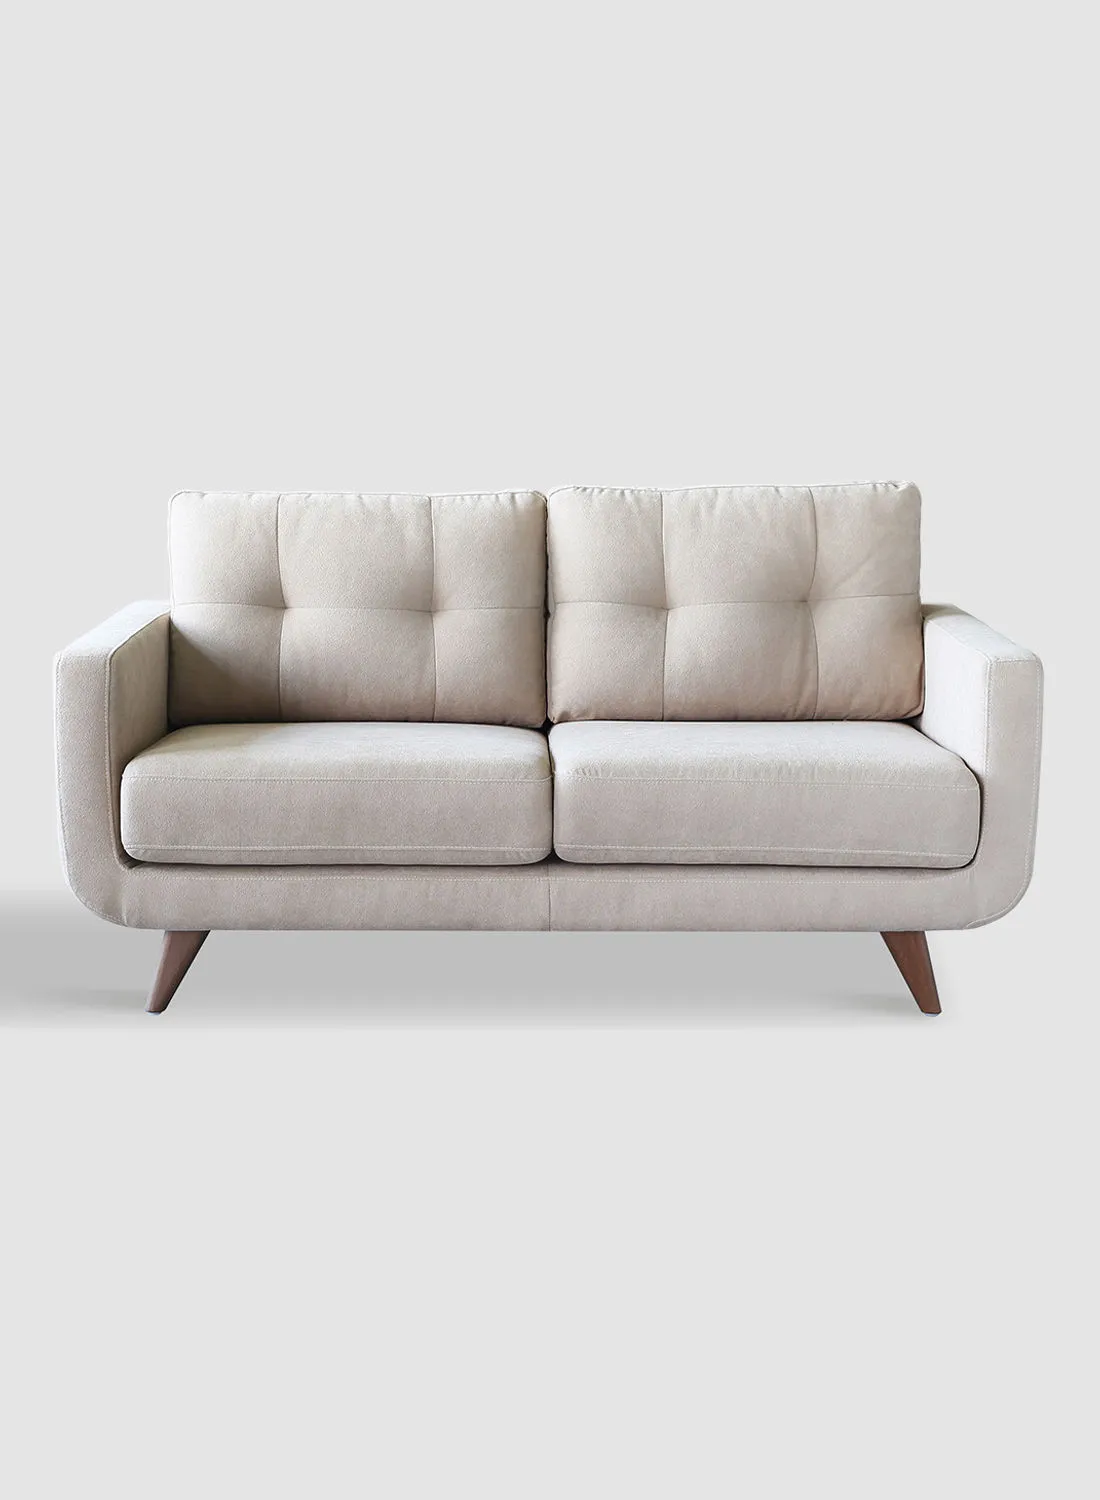 Switch Sofa - Upholstered Fabric Beigish Creme Wood Couch - 1620 X 870 X 840 - 2 Seater Sofa Relaxing Sofa